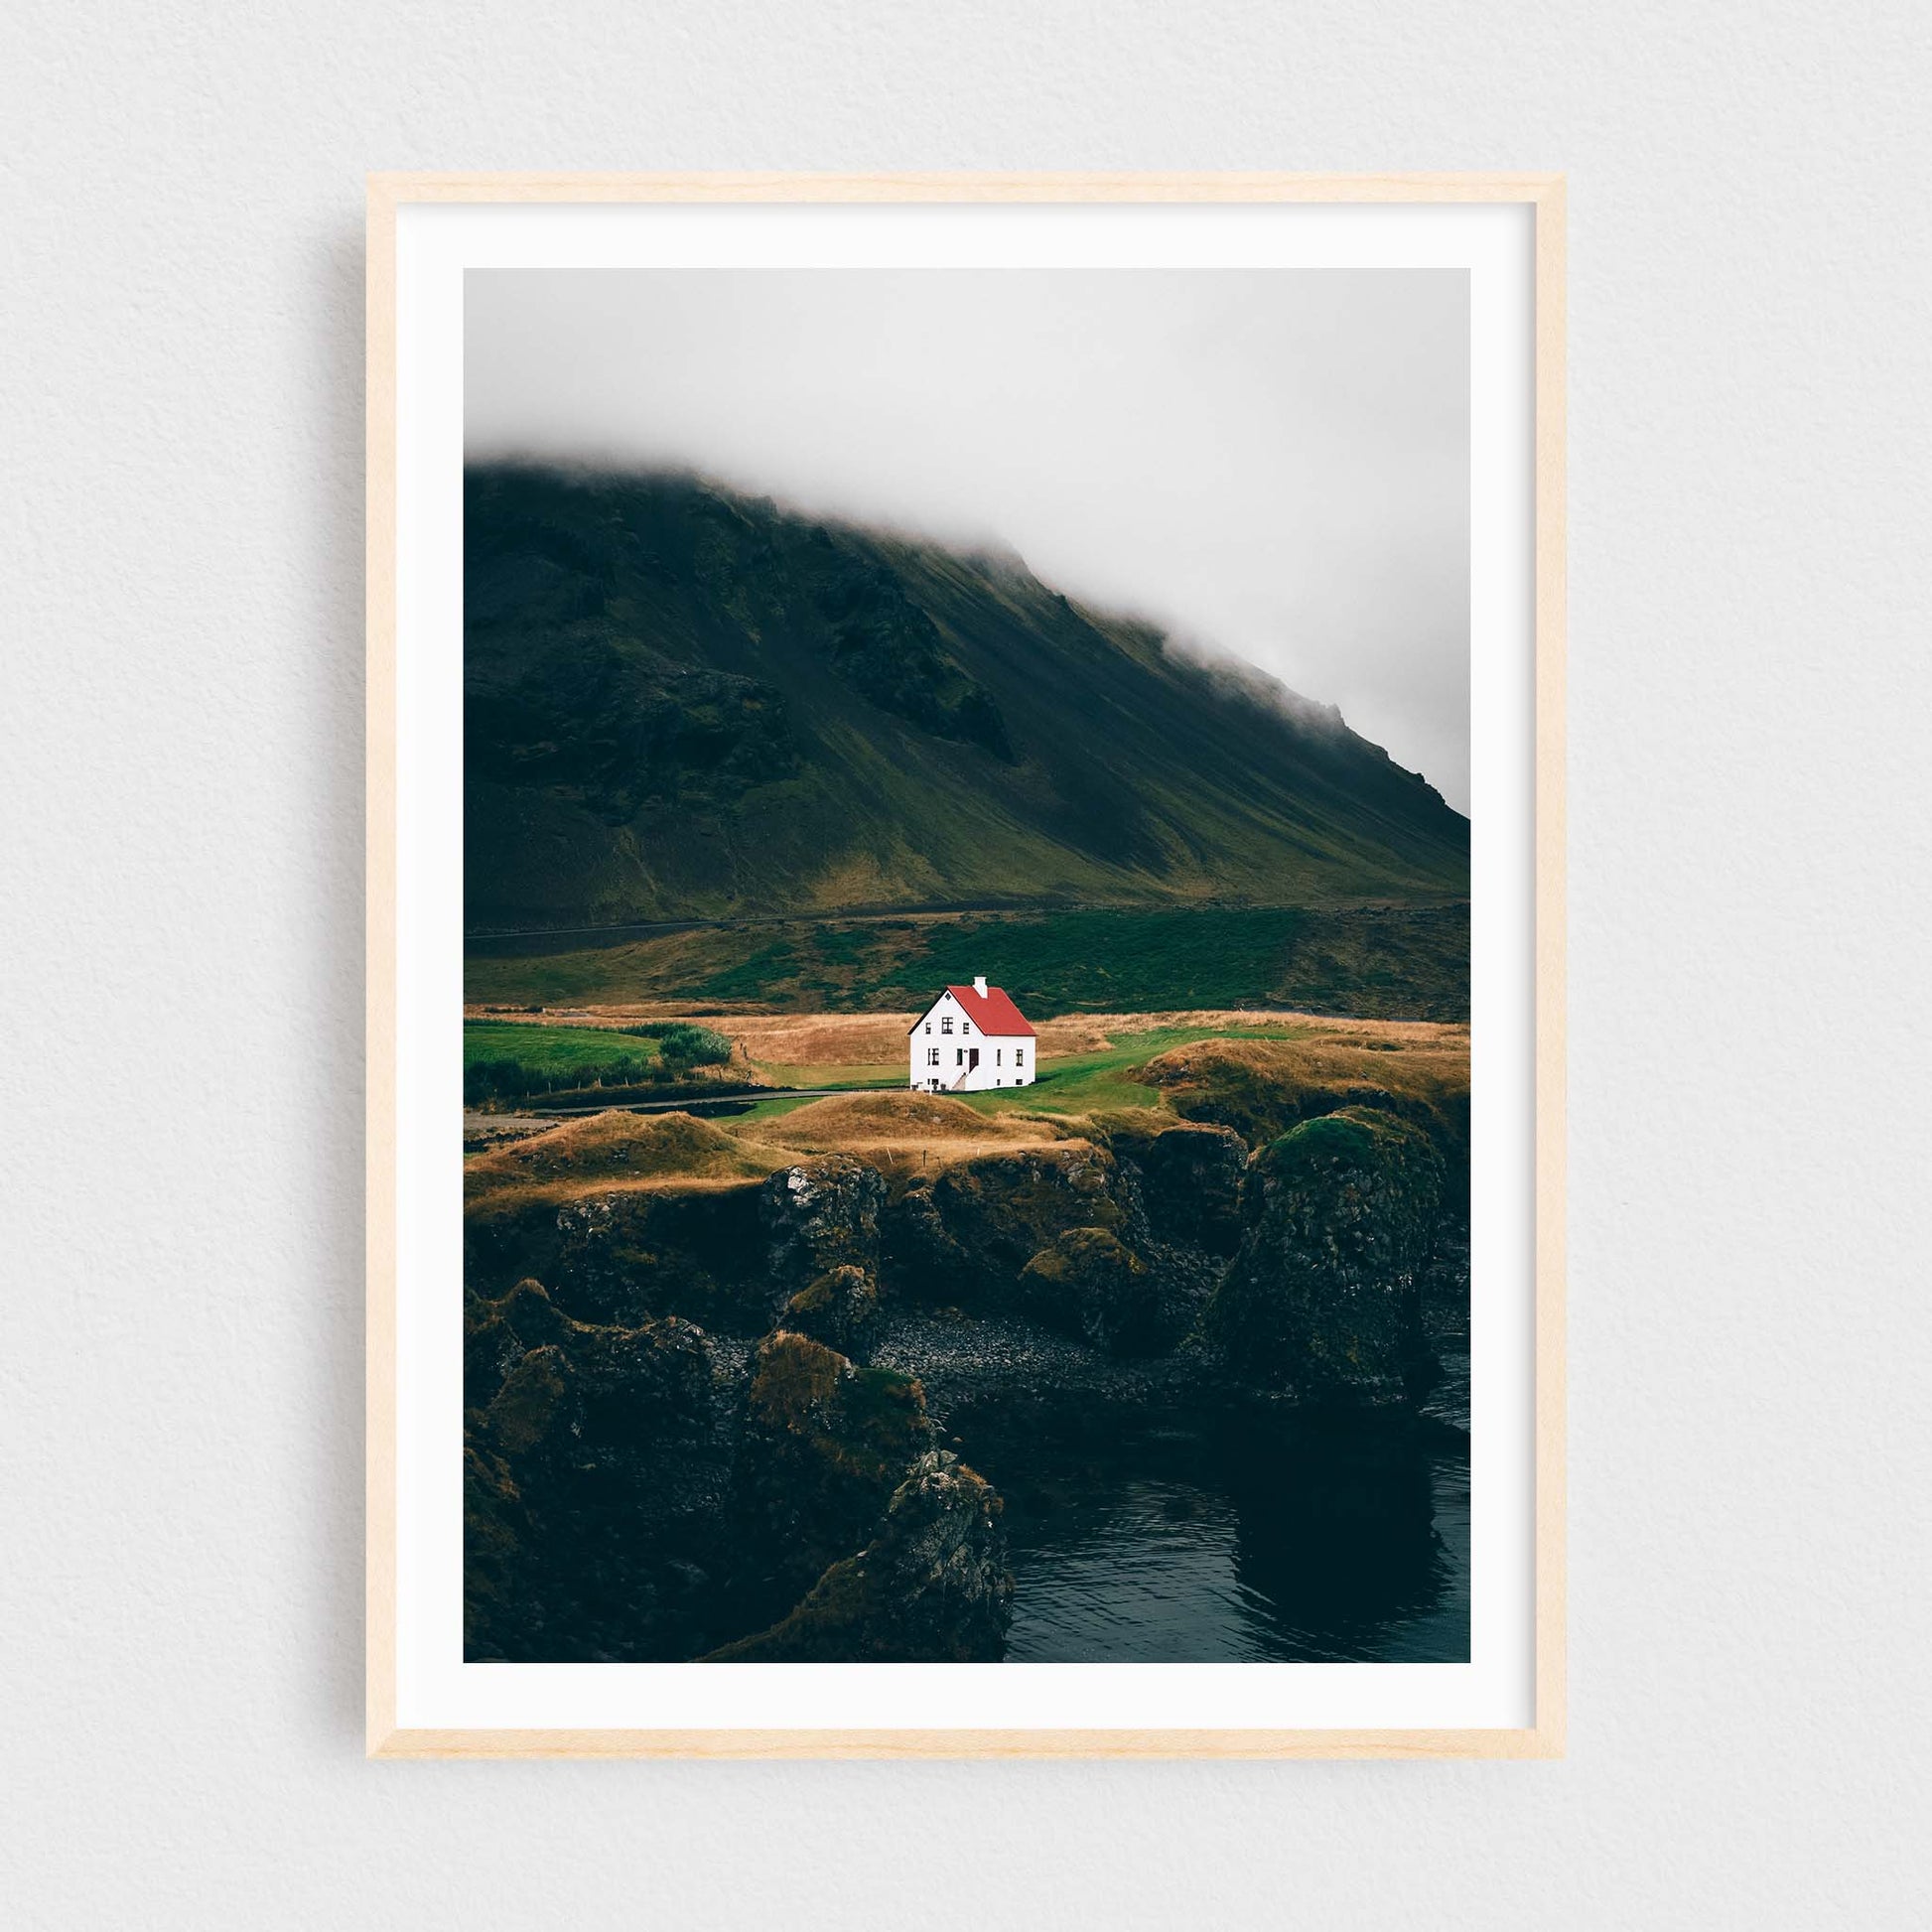 Iceland fine art photography print featuring Arnarstapi lonely house, in a maple frame